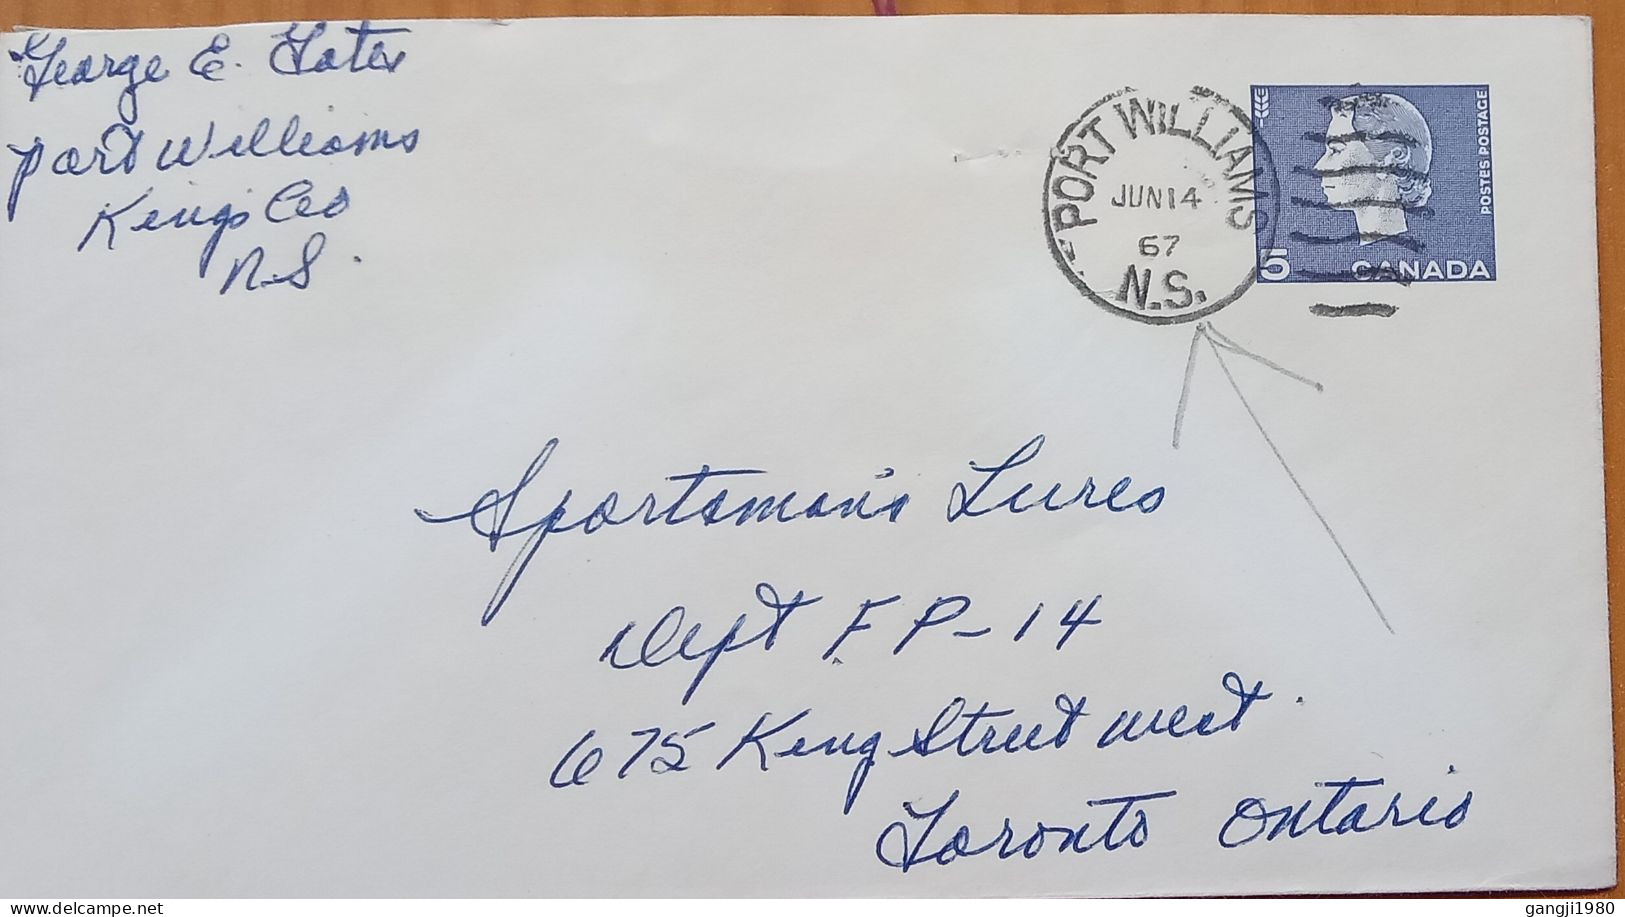 CANADA 1967, POSTAL STATIONERY, COVER USED, QUEEN PORTRAIT,  PORT WILLIAMS CITY CANCEL. - Lettres & Documents